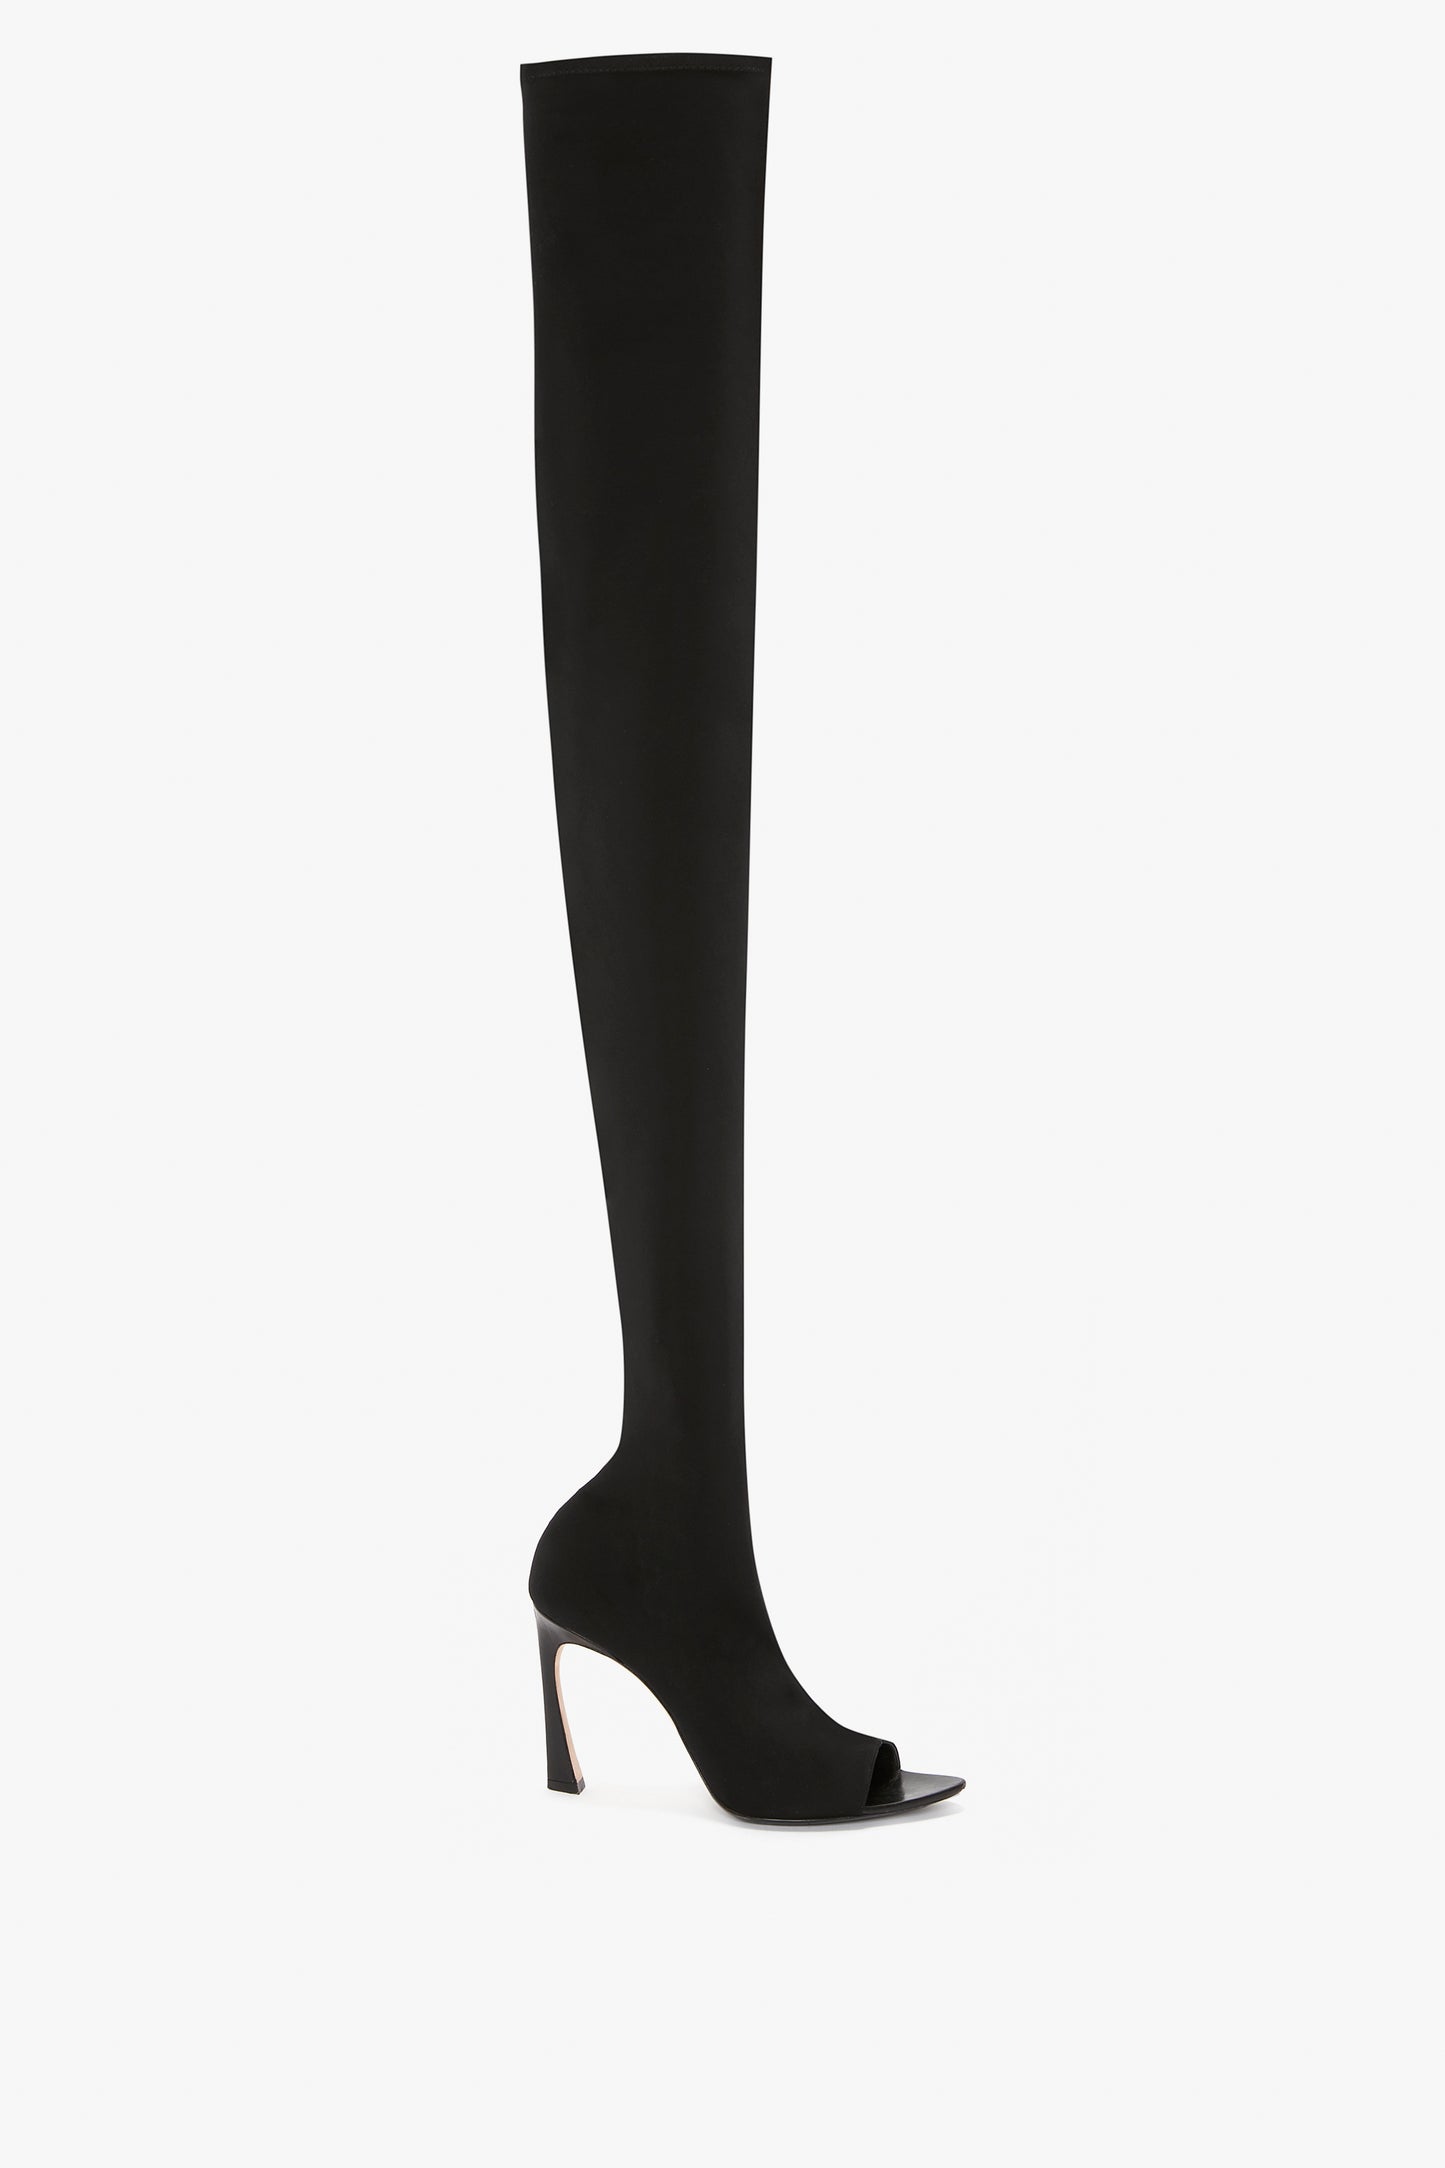 Black Victoria Beckham peep-toe over-the-knee boot with a sculptural heel, isolated on a white background.